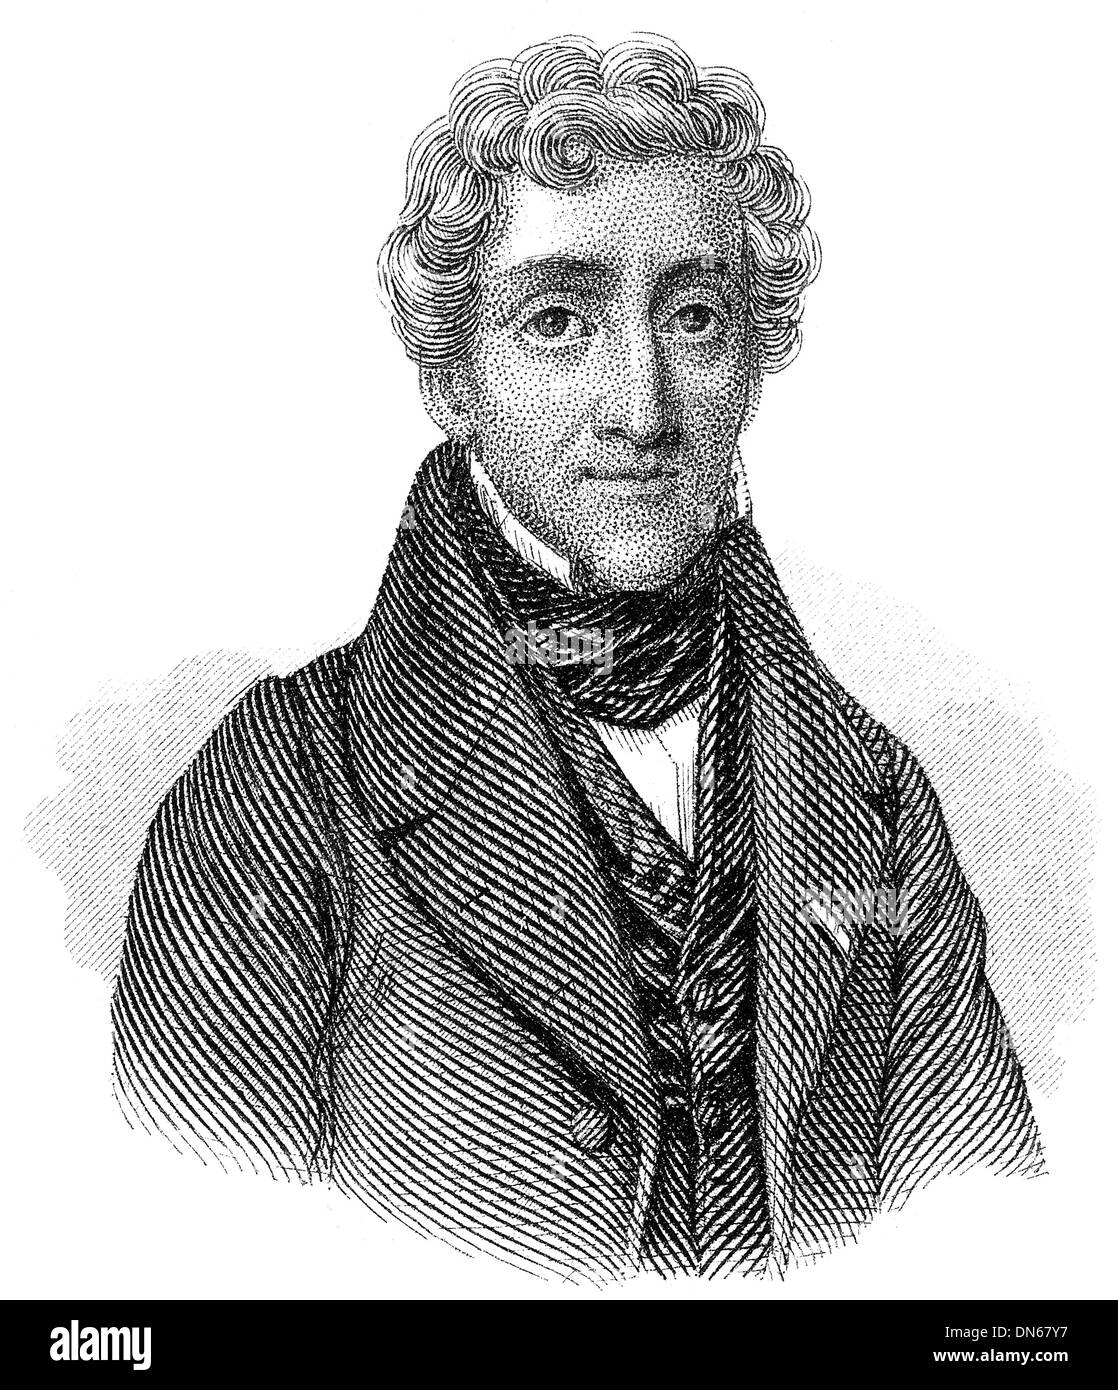 Portrait of Louis-Mathieu Molé, or Comte Molé and Mathieu Molé, 1781 - 1855, a French statesman and Prime Minister of France, Stock Photo